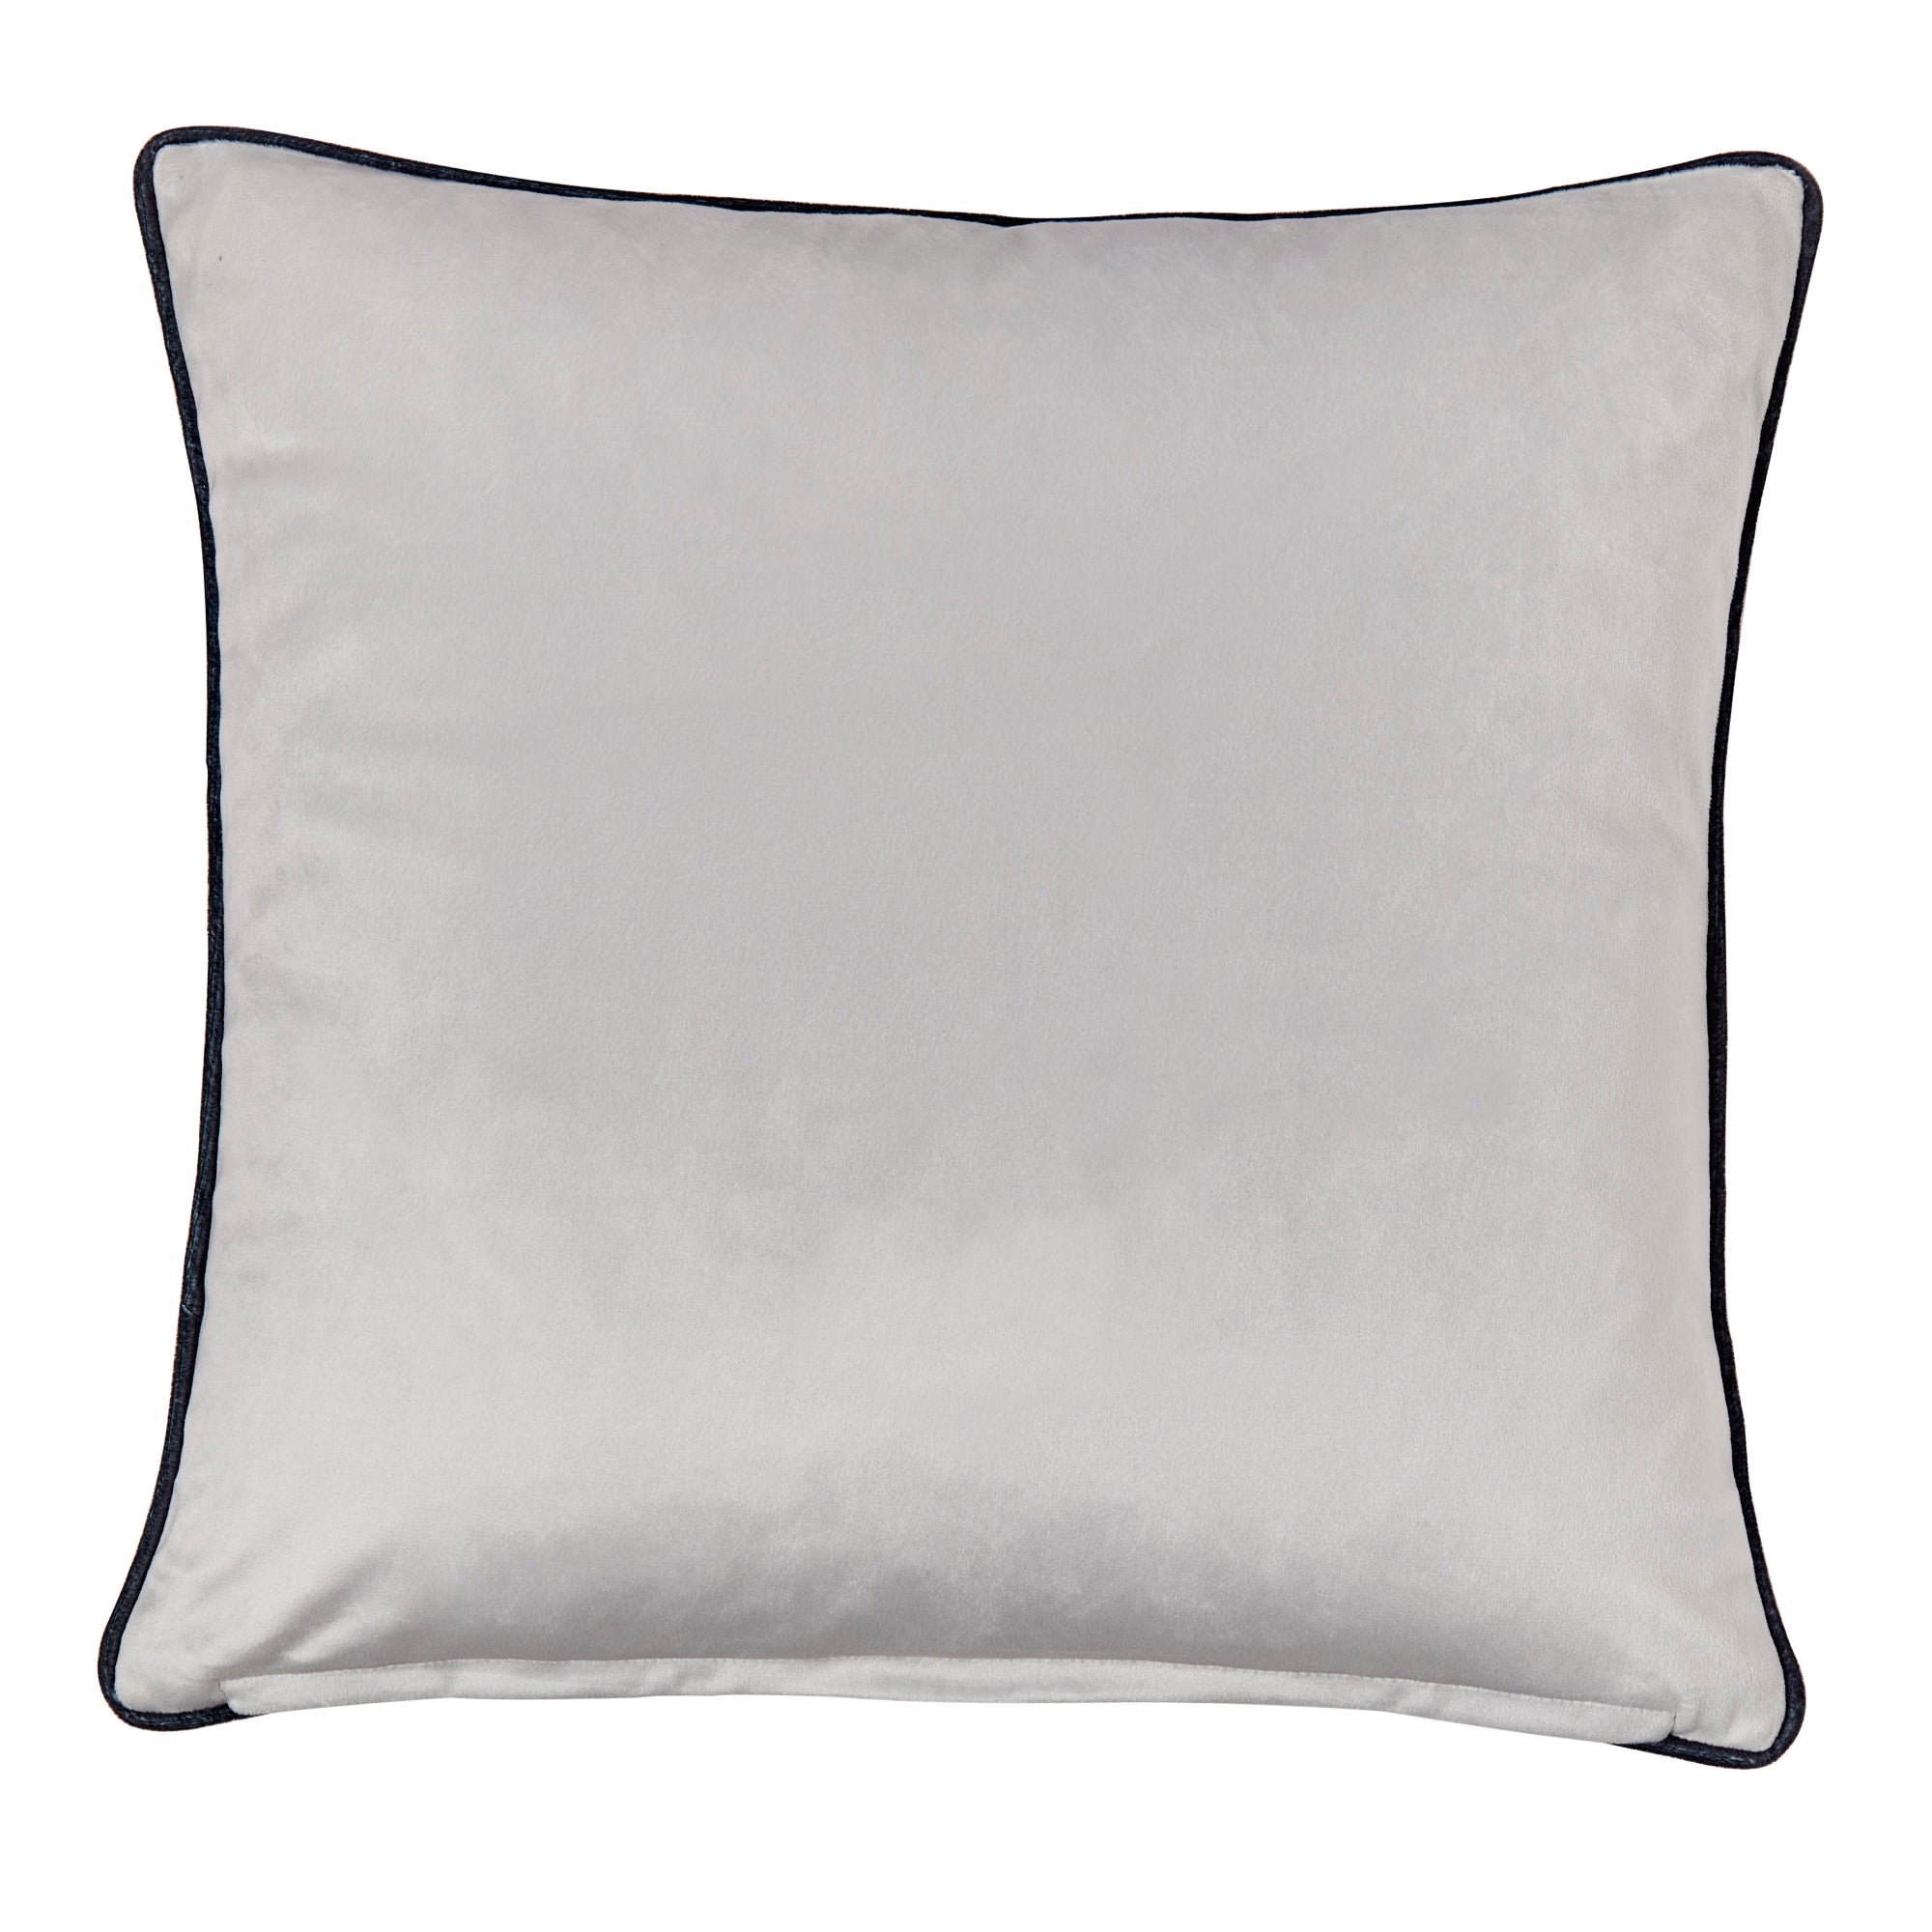 Alma Filled Cushion by Fusion in Natural 43 x 43cm - Filled Cushion - Fusion